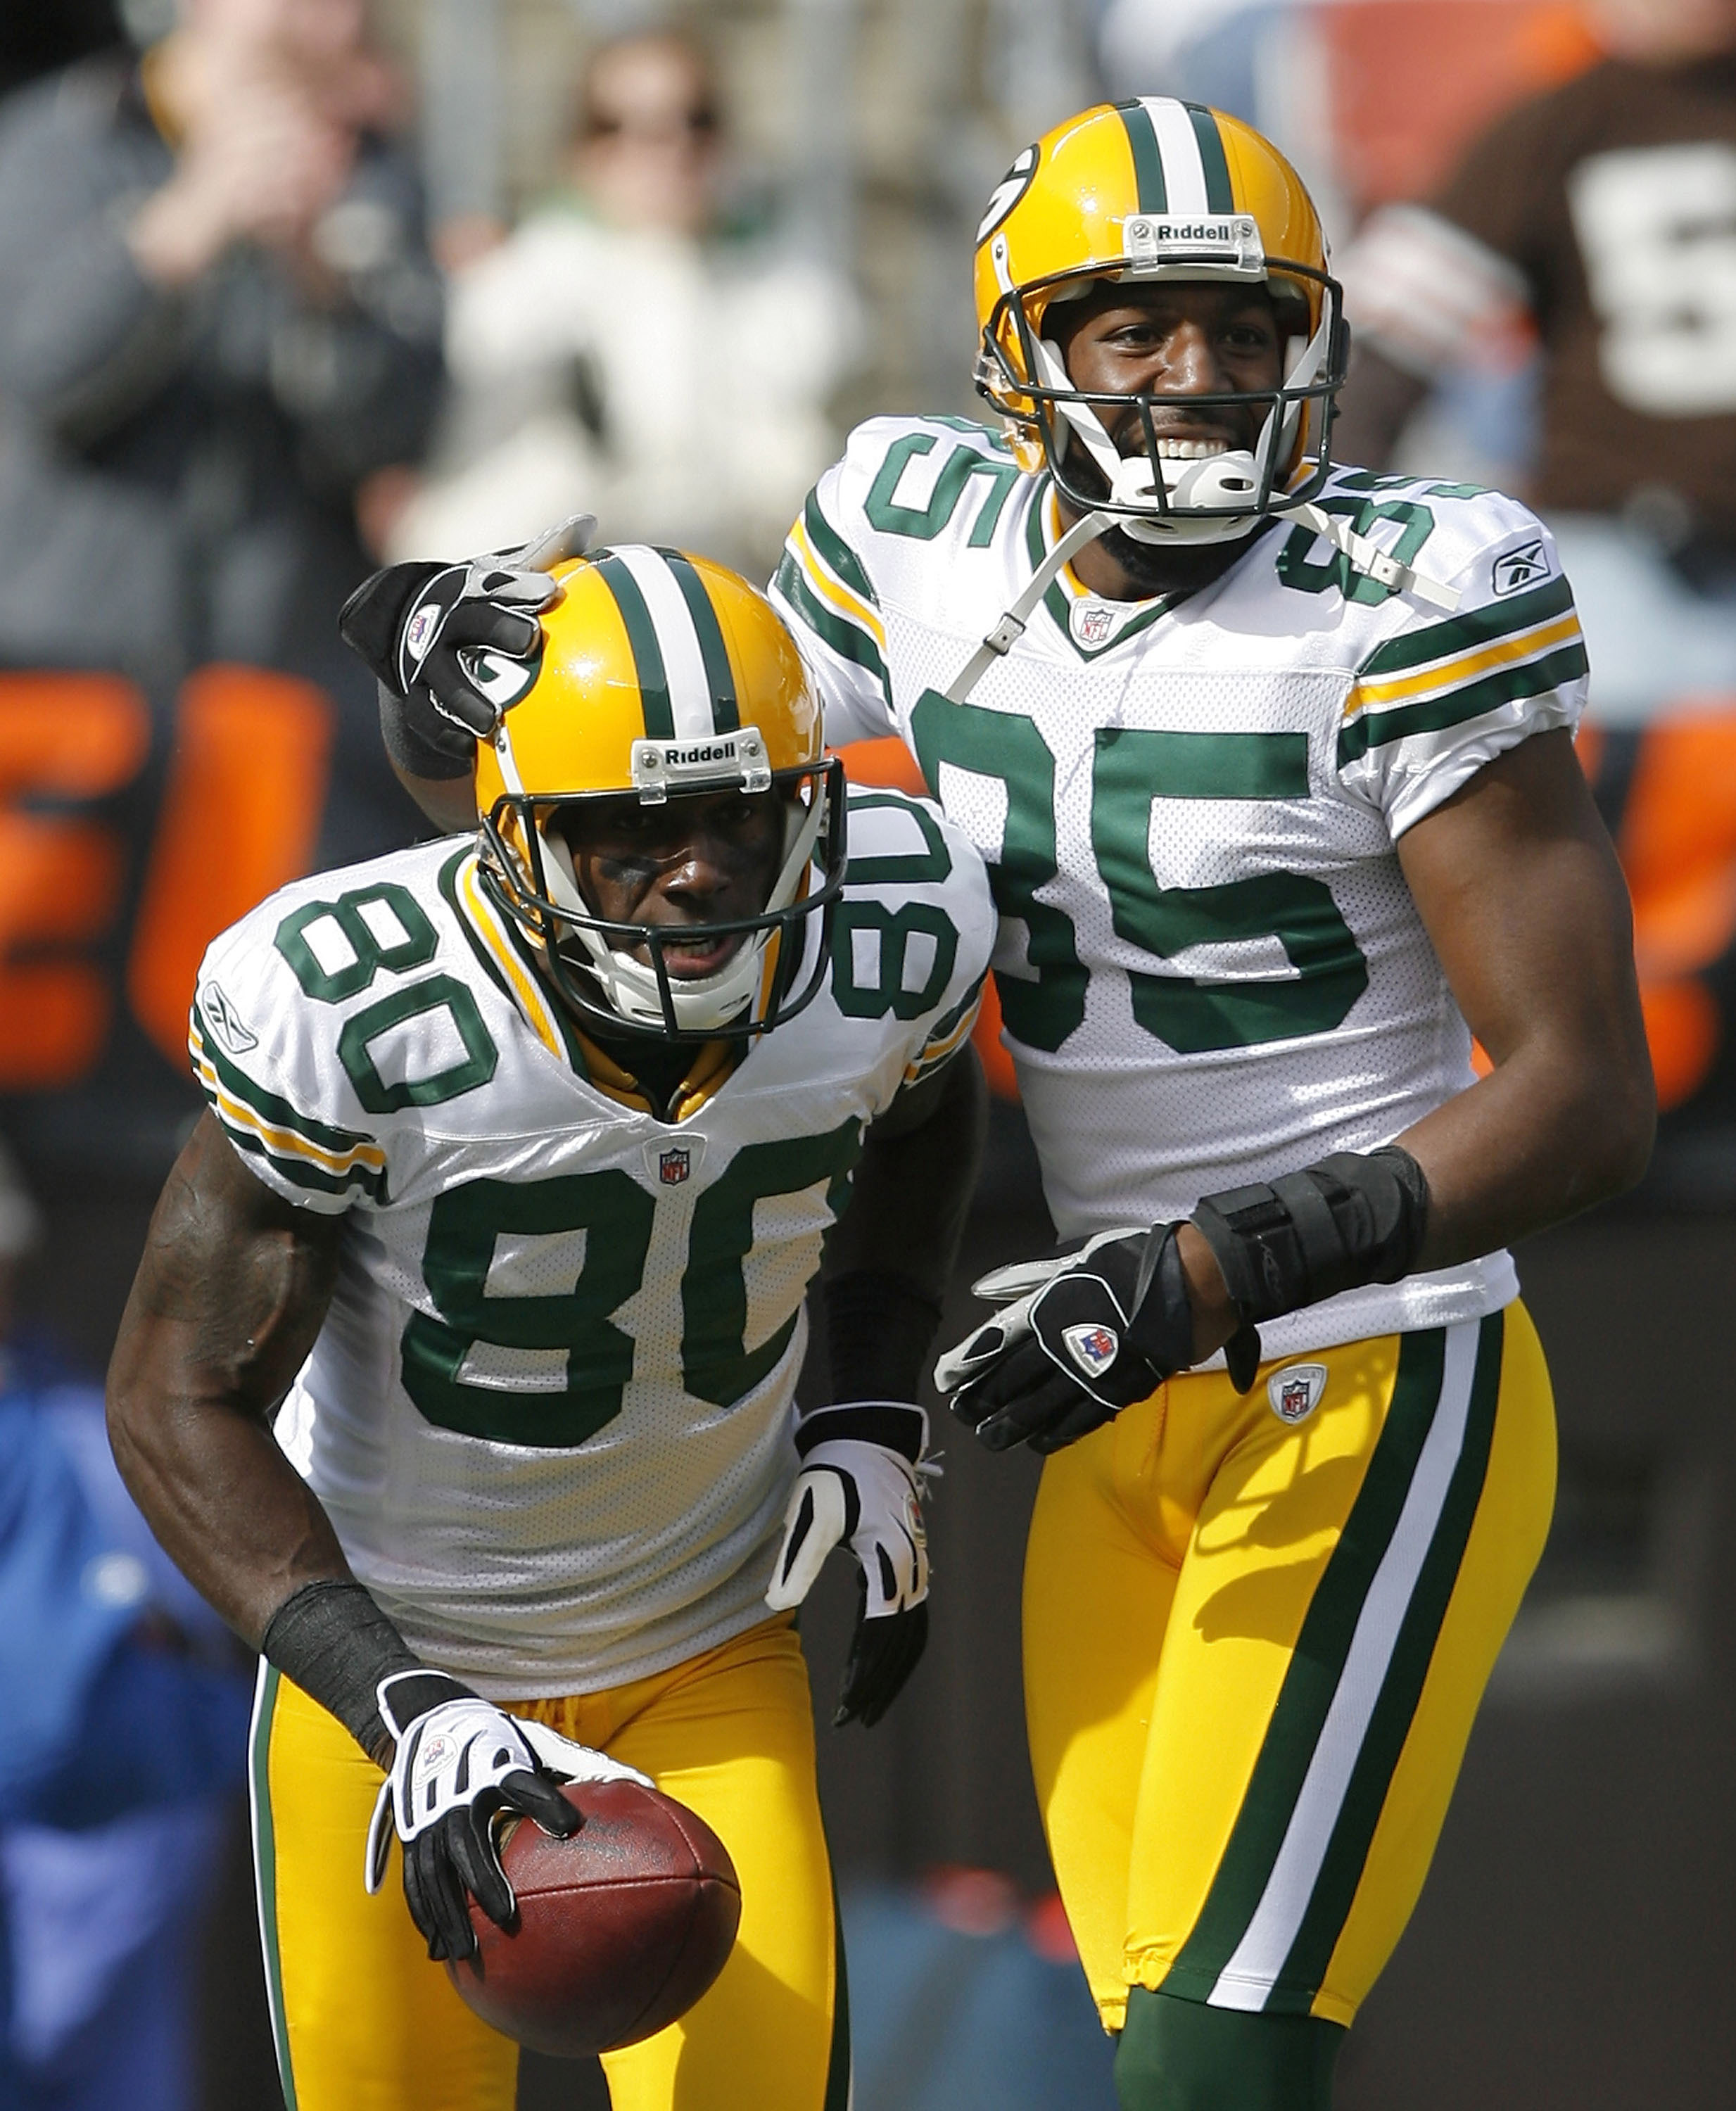 CLEVELAND, OH - OCTOBER 25:  Donald Driver #80 and Greg Jennings #85 of the Green Bay Packers celebrate after scoring a touchdown against the Cleveland Browns at Cleveland Browns Stadium on October 25, 2009 in Cleveland, Ohio.  (Photo by Matt Sullivan/Get